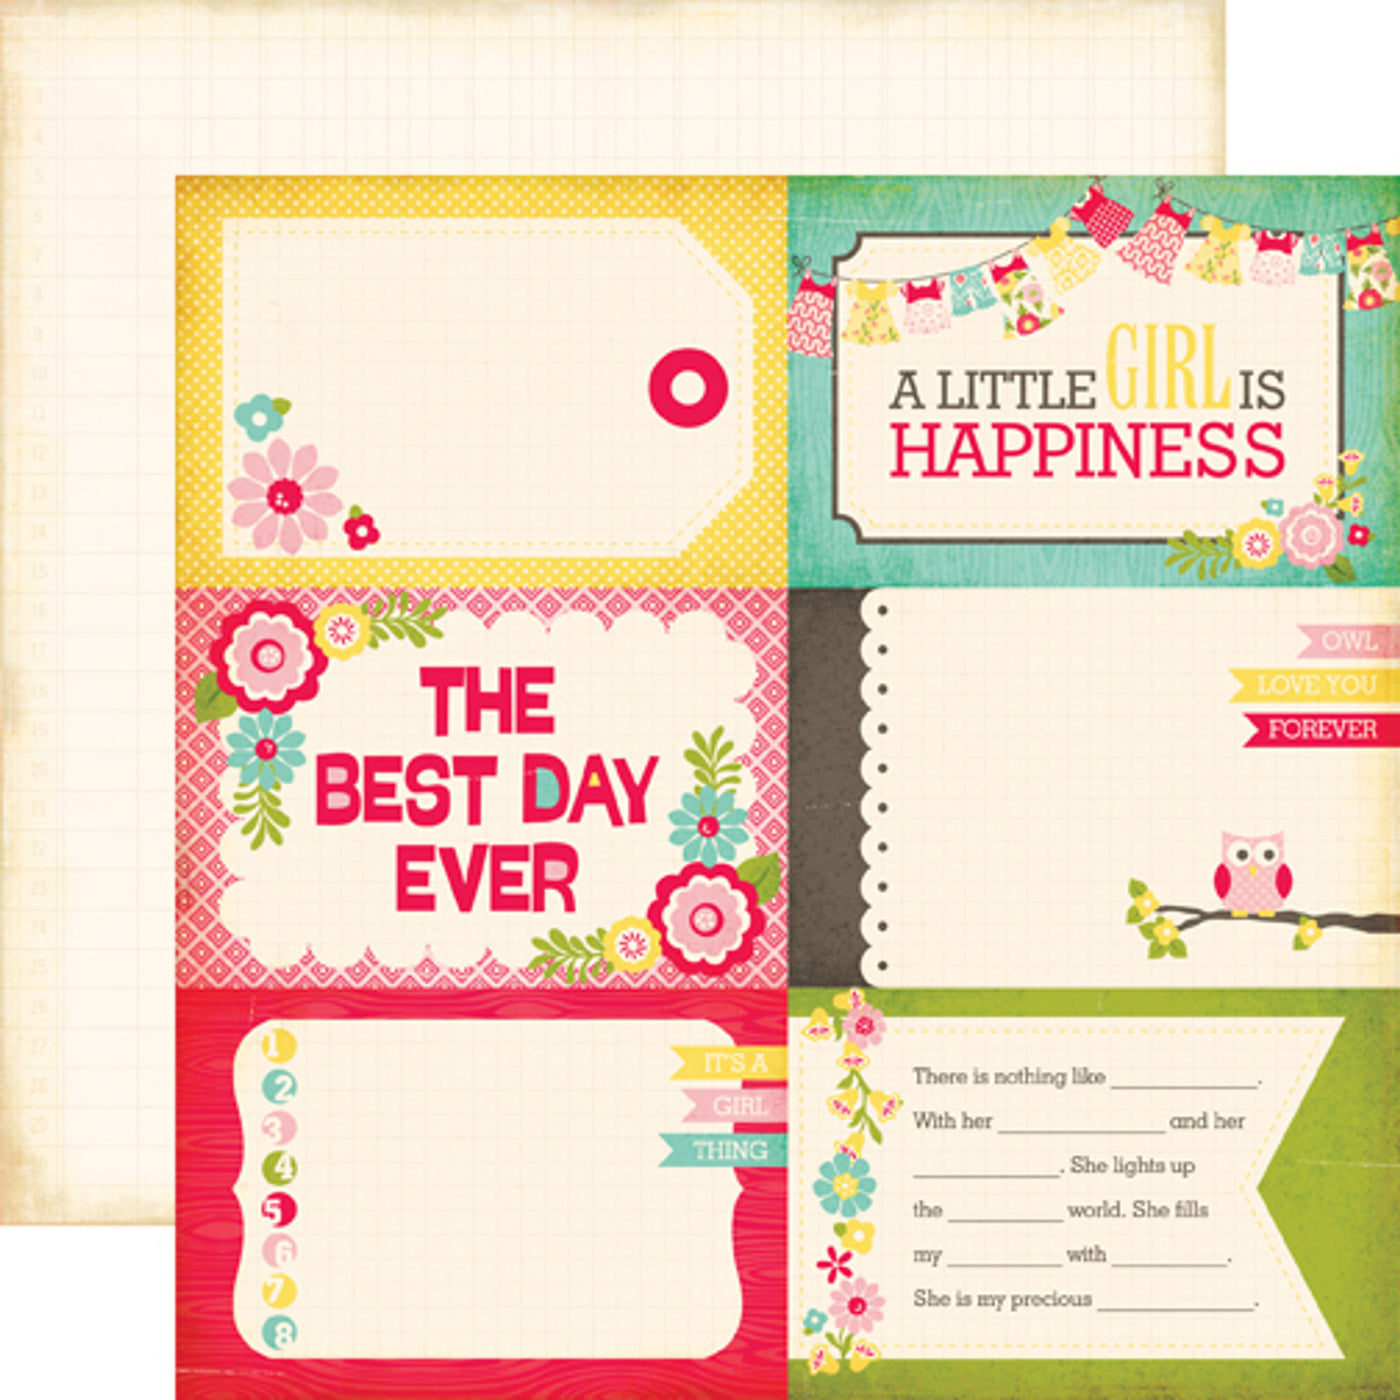 12x12 double-sided patterned paper - (sweet girl journaling cards and phrases with an off-white ledger paper background reverse) - Echo Park Paper.